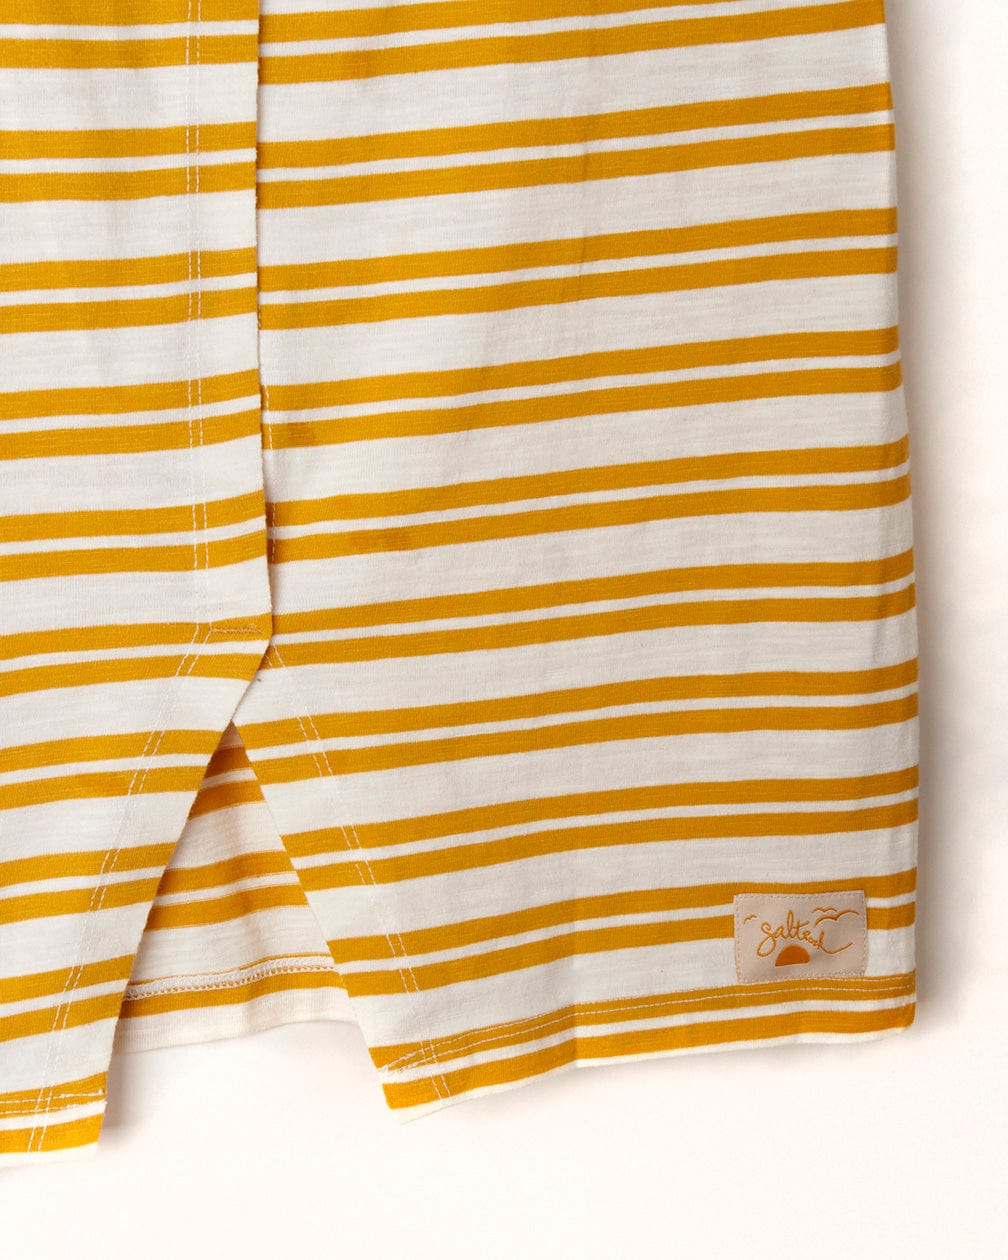 Yellow and white yarn dye stripe print fabric with a Saltrock brand label.